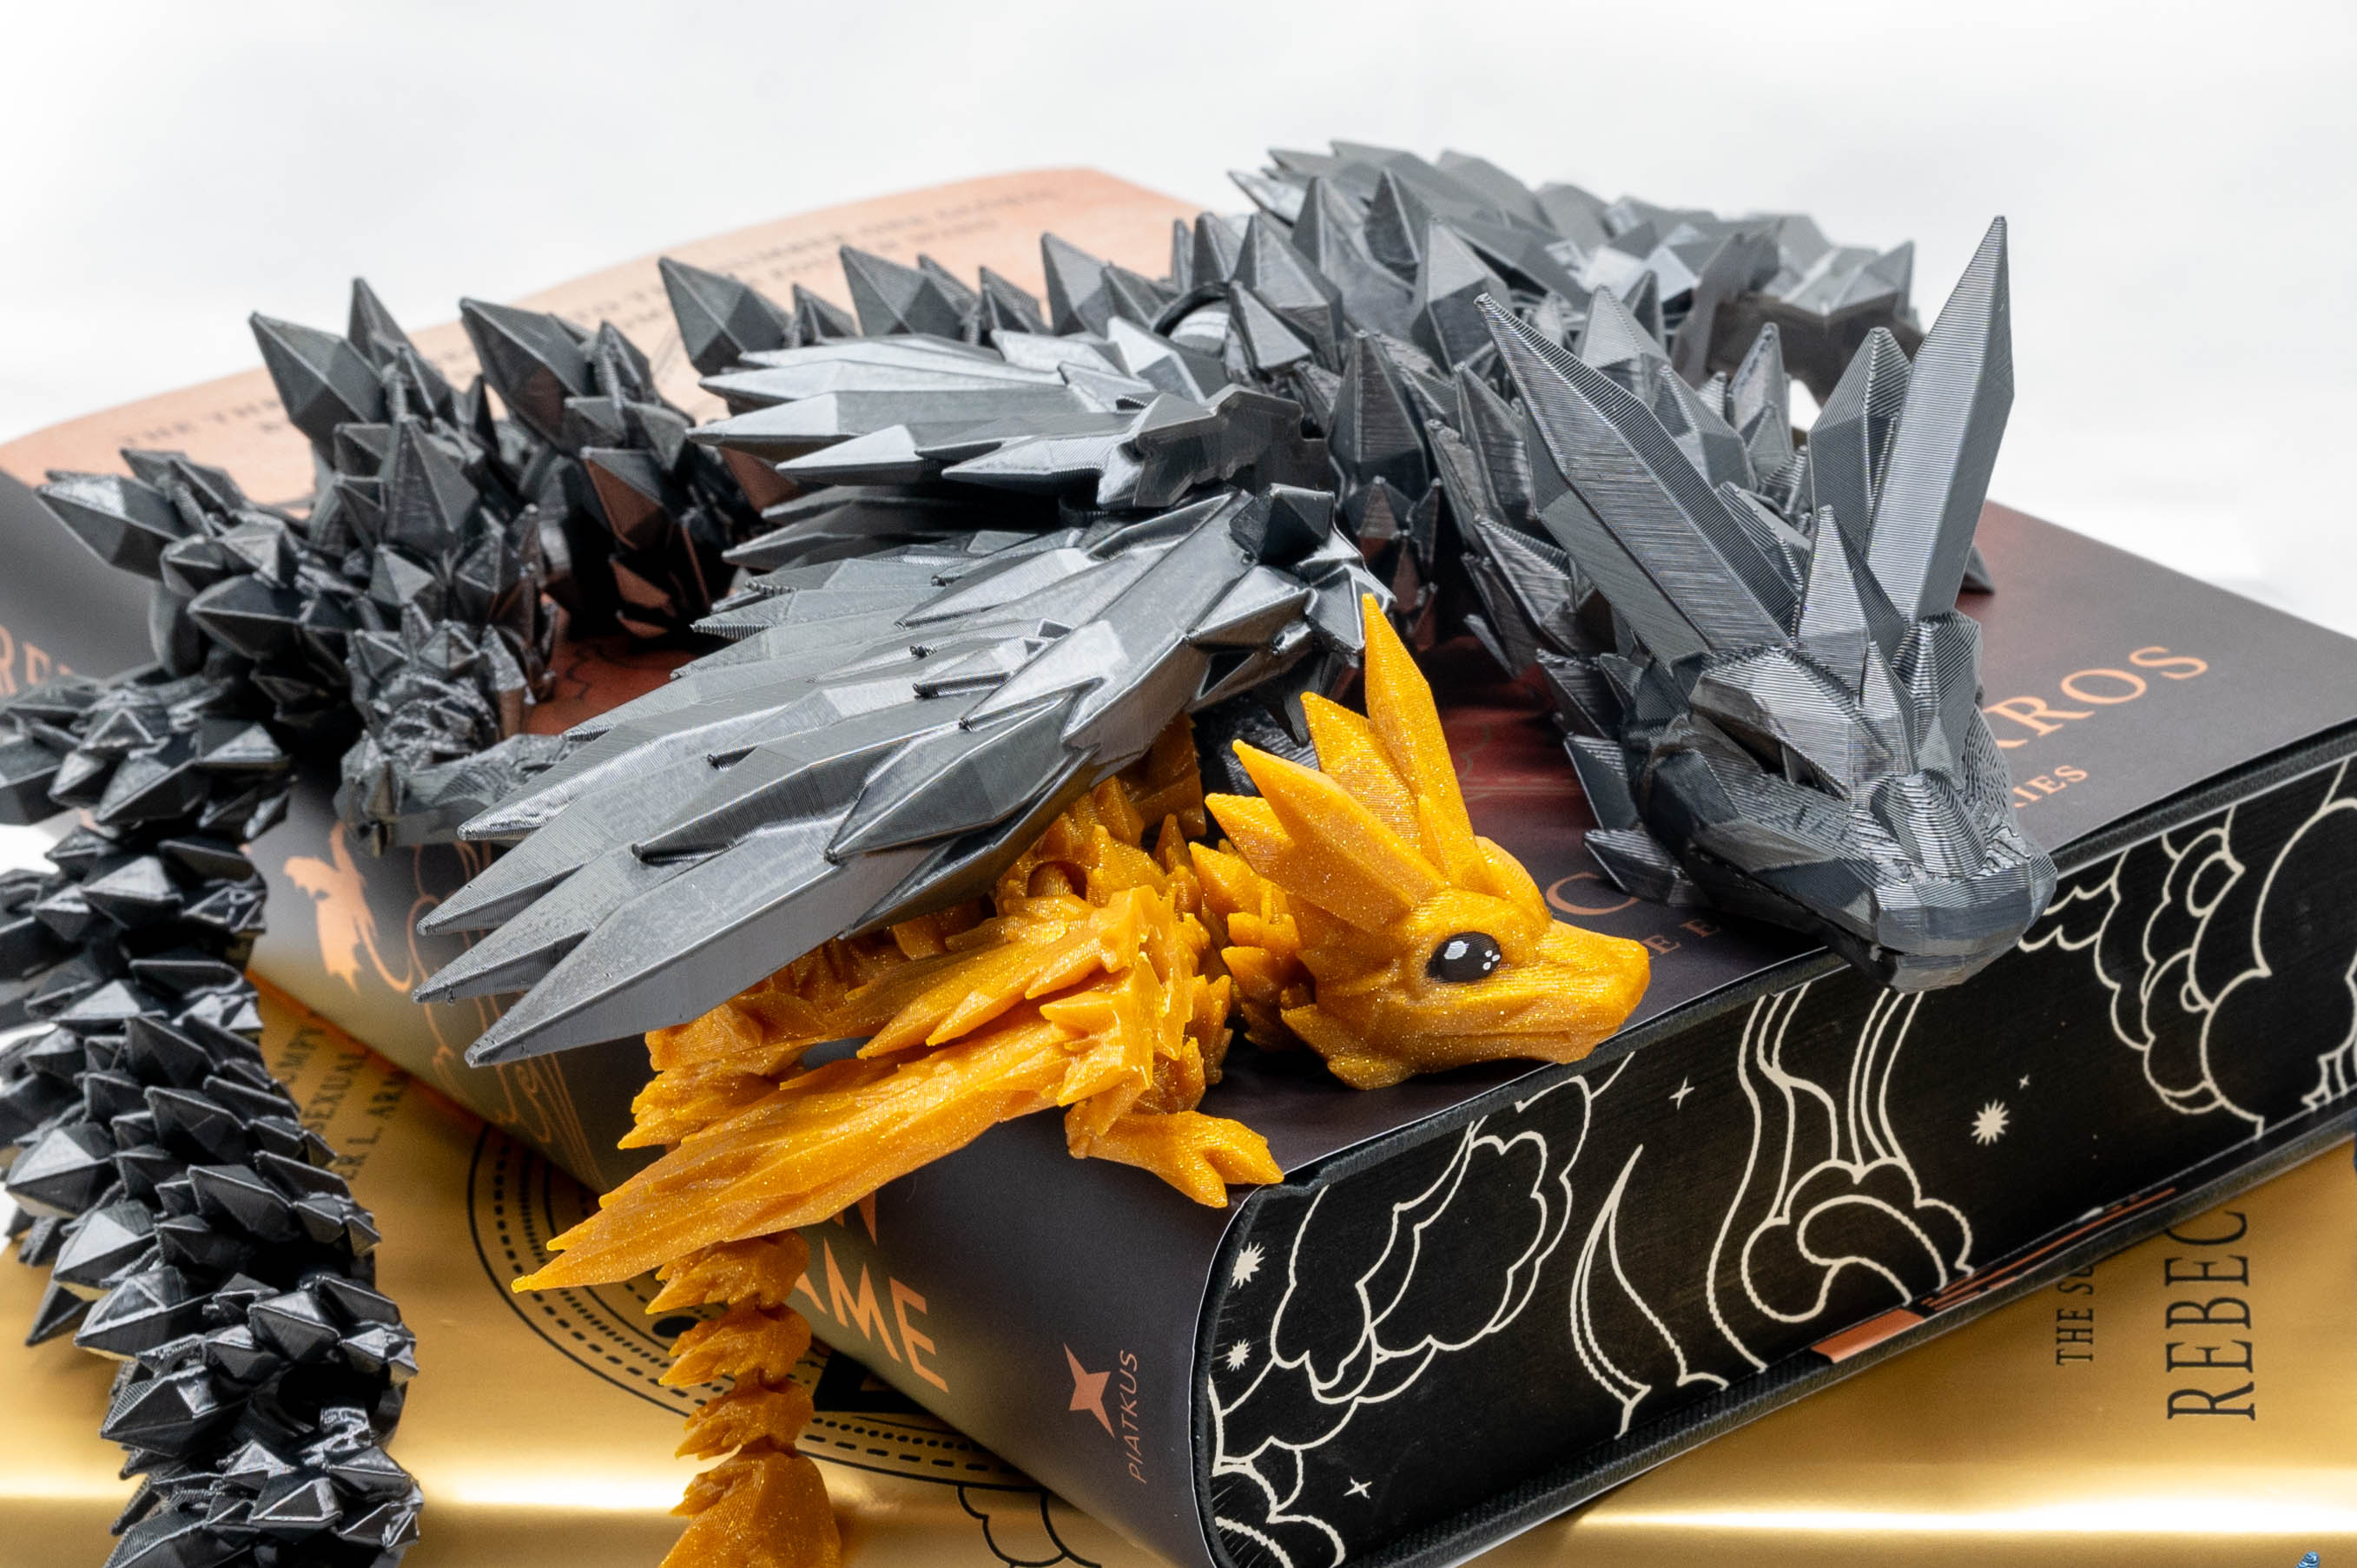 Fourth Wing & Iron Flame Inspired Dragons Limited Edition